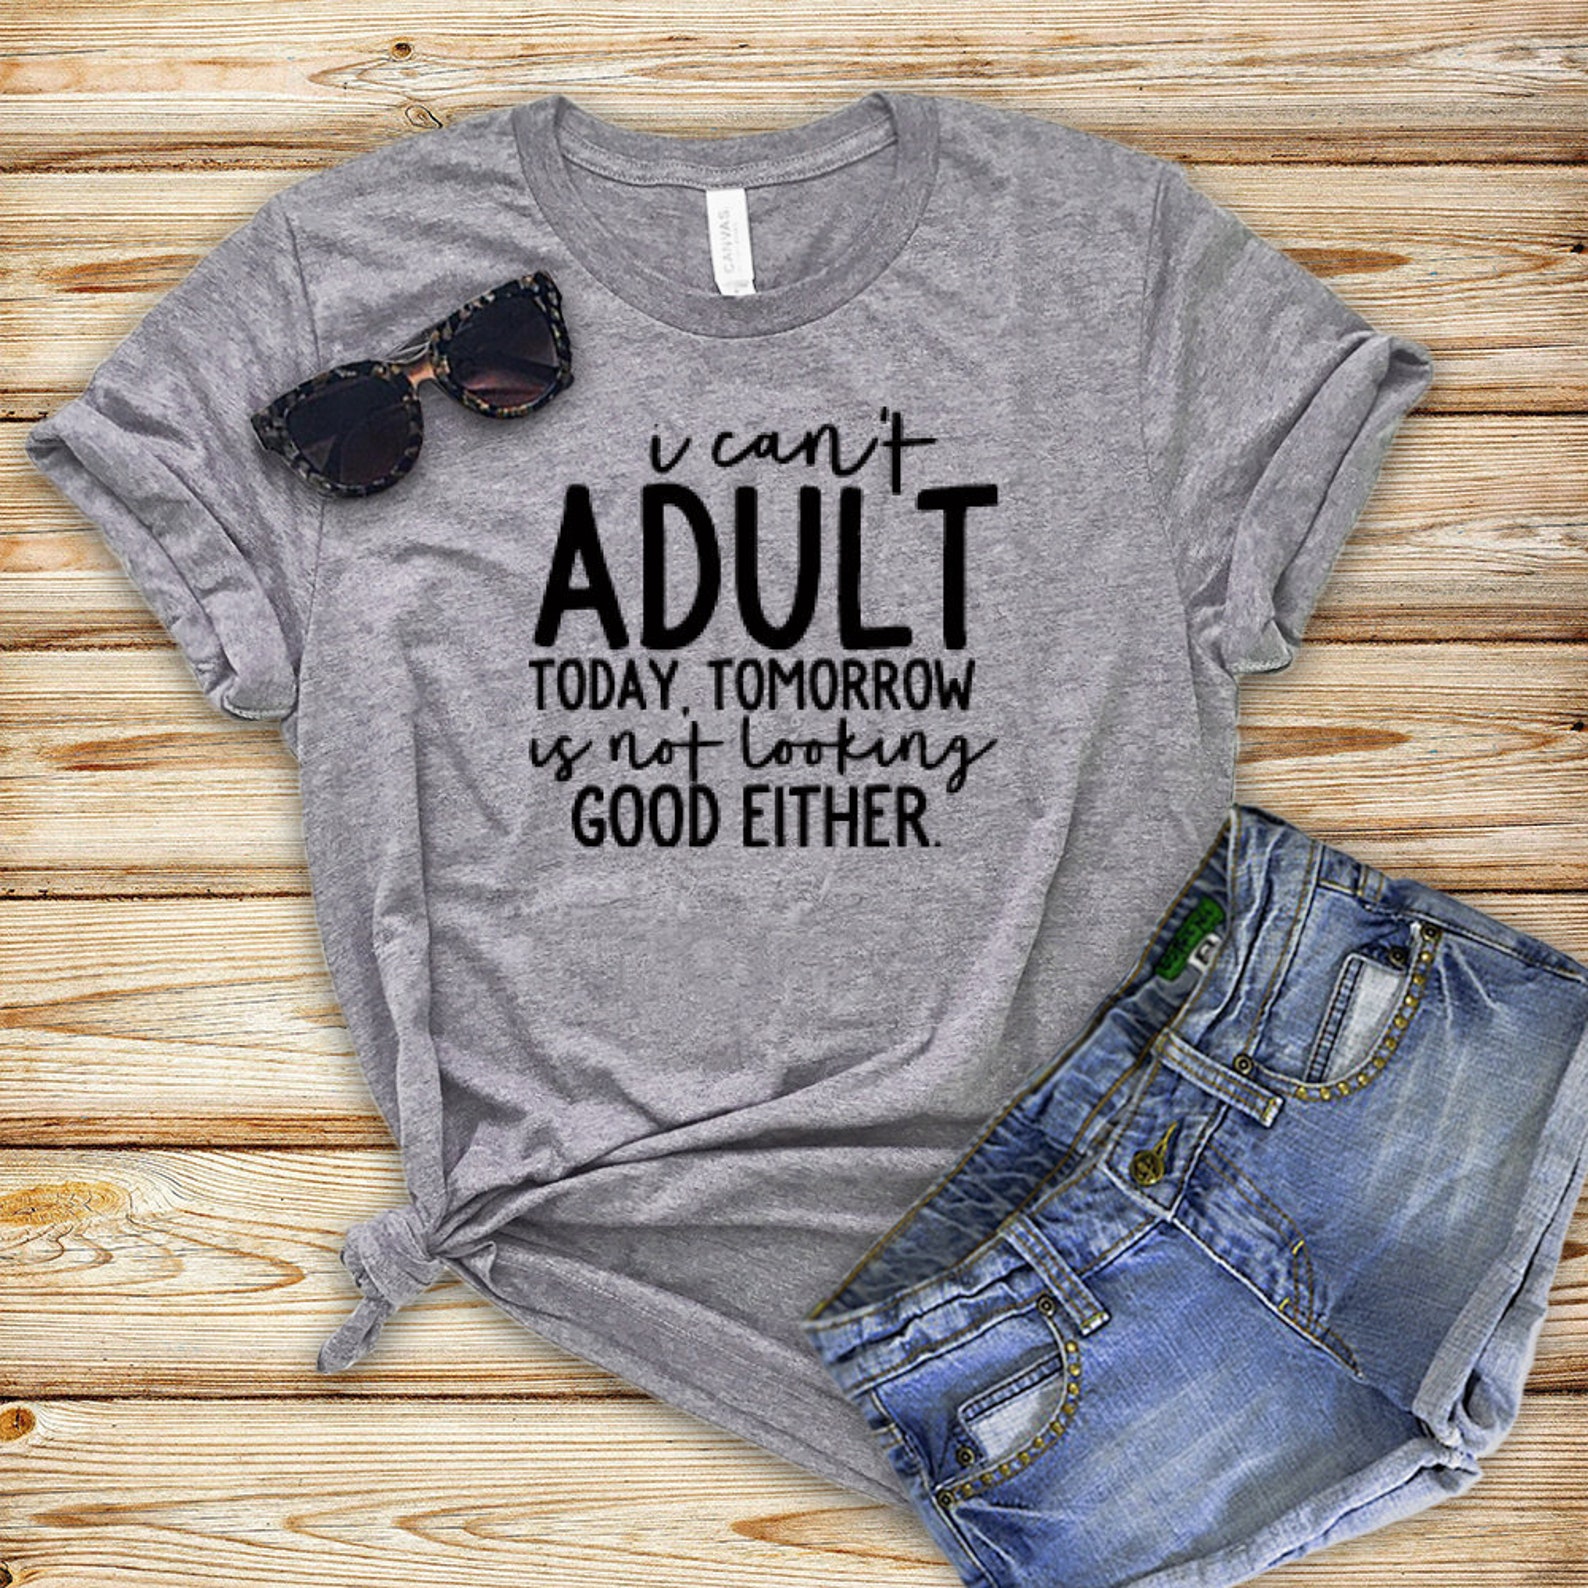 Can't Adult Today Shirt Adulting Shirt Shirts With - Etsy